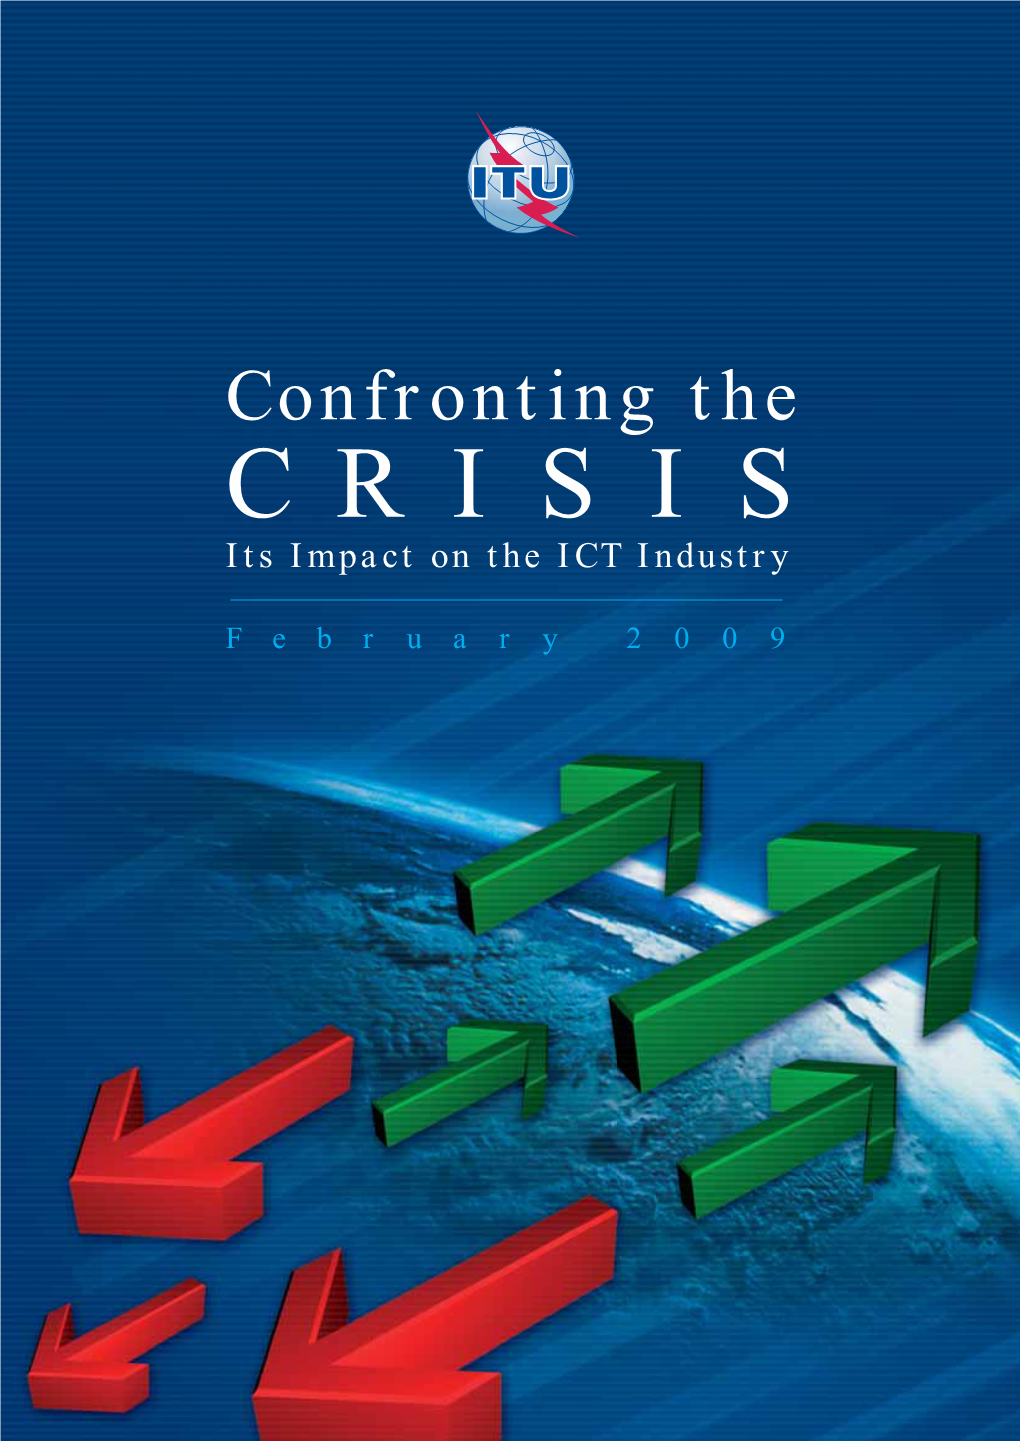 Confronting the CRISIS Its Impact on the ICT Industry